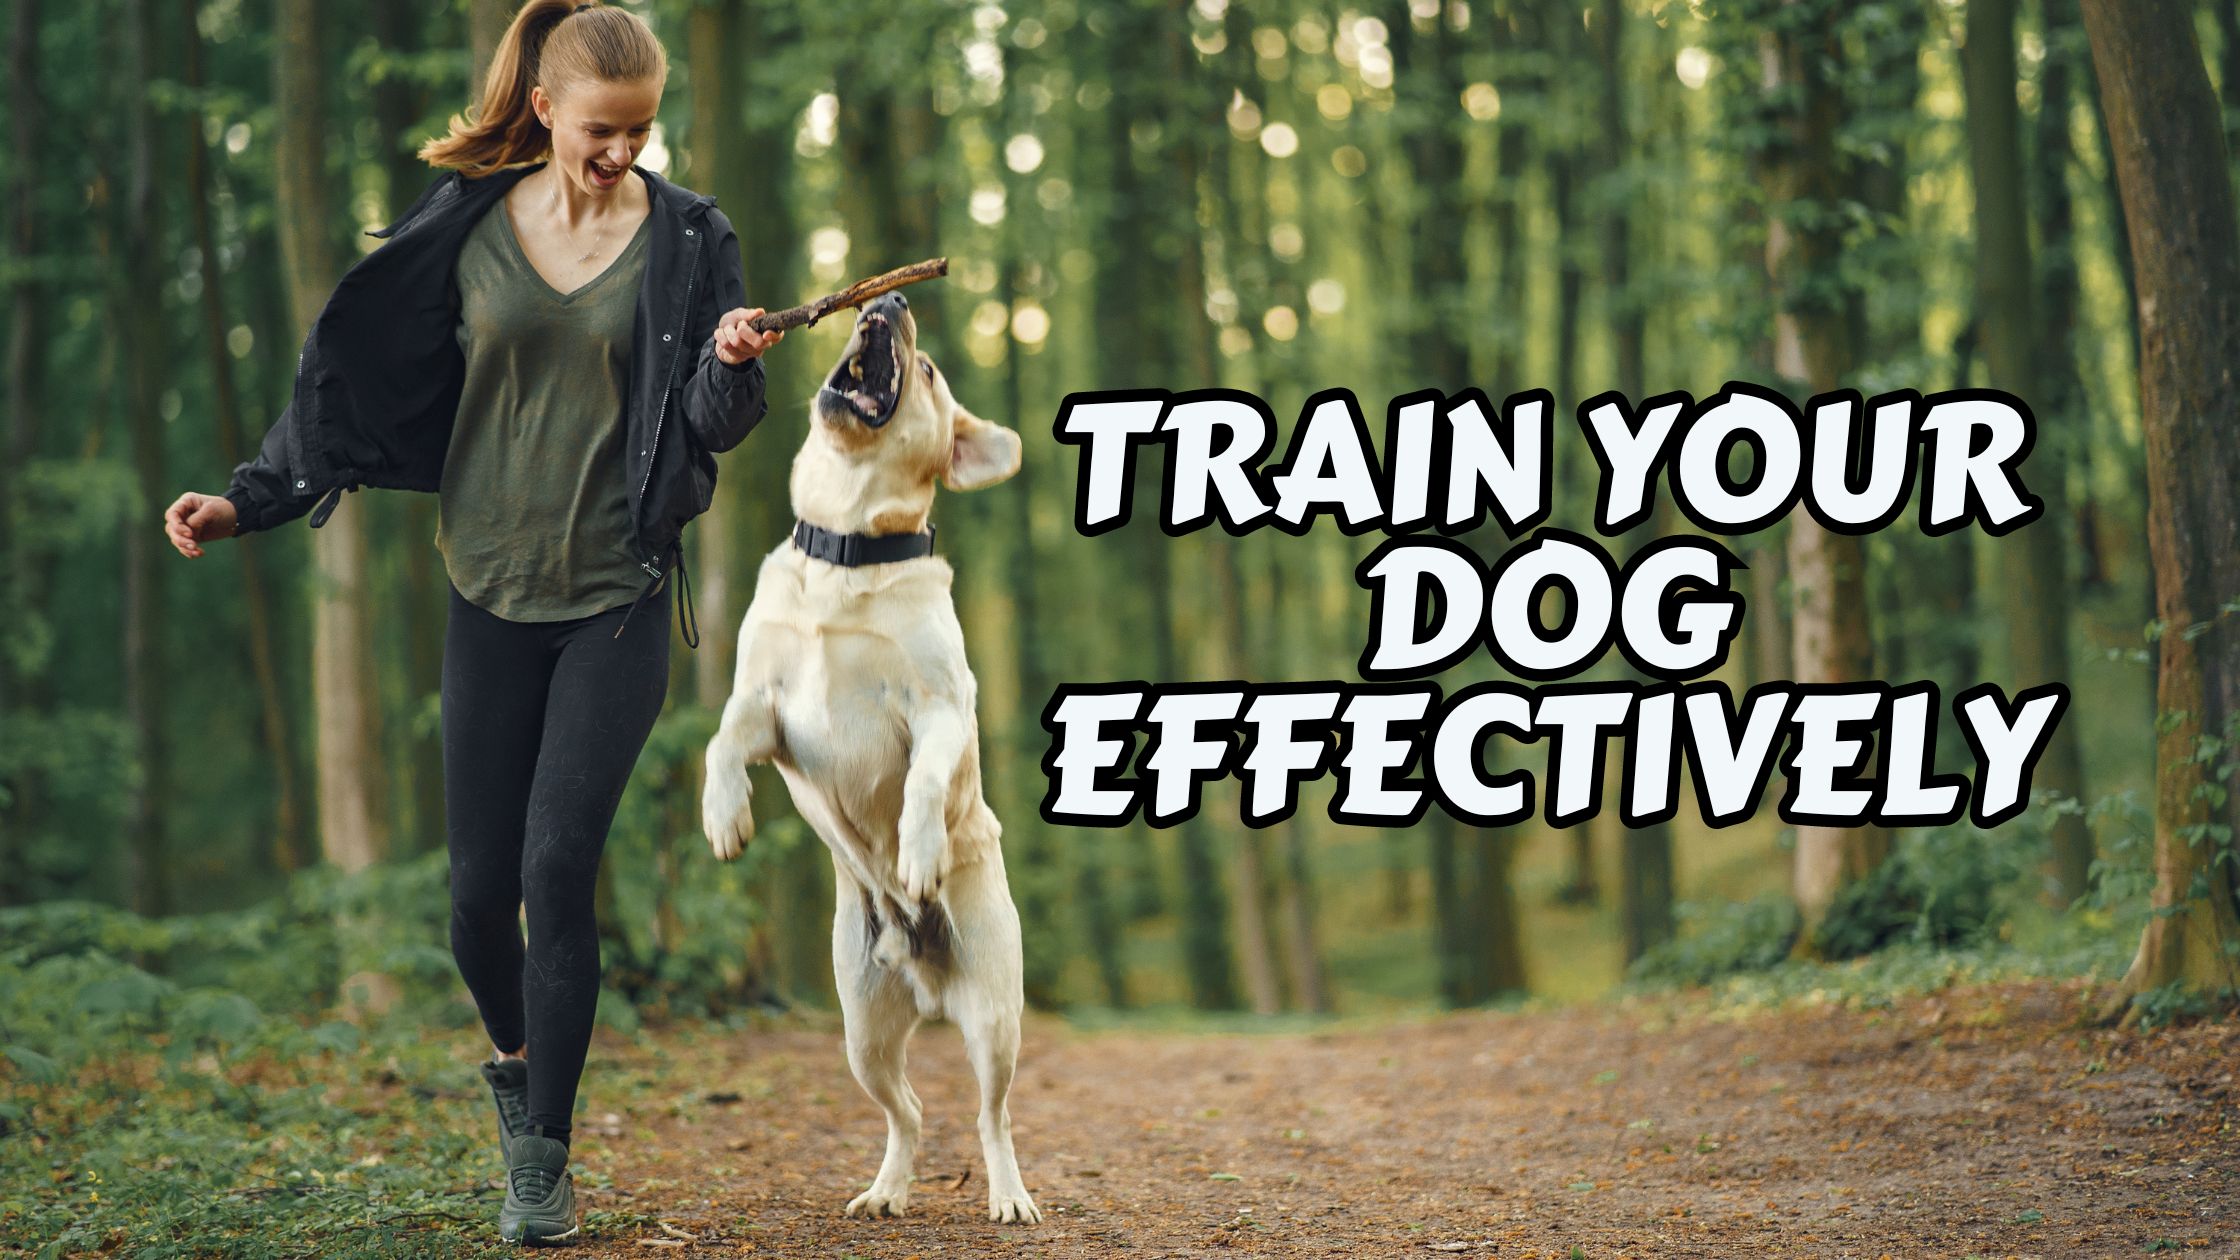 TRAIN YOUR DOG EFFECTIVELY